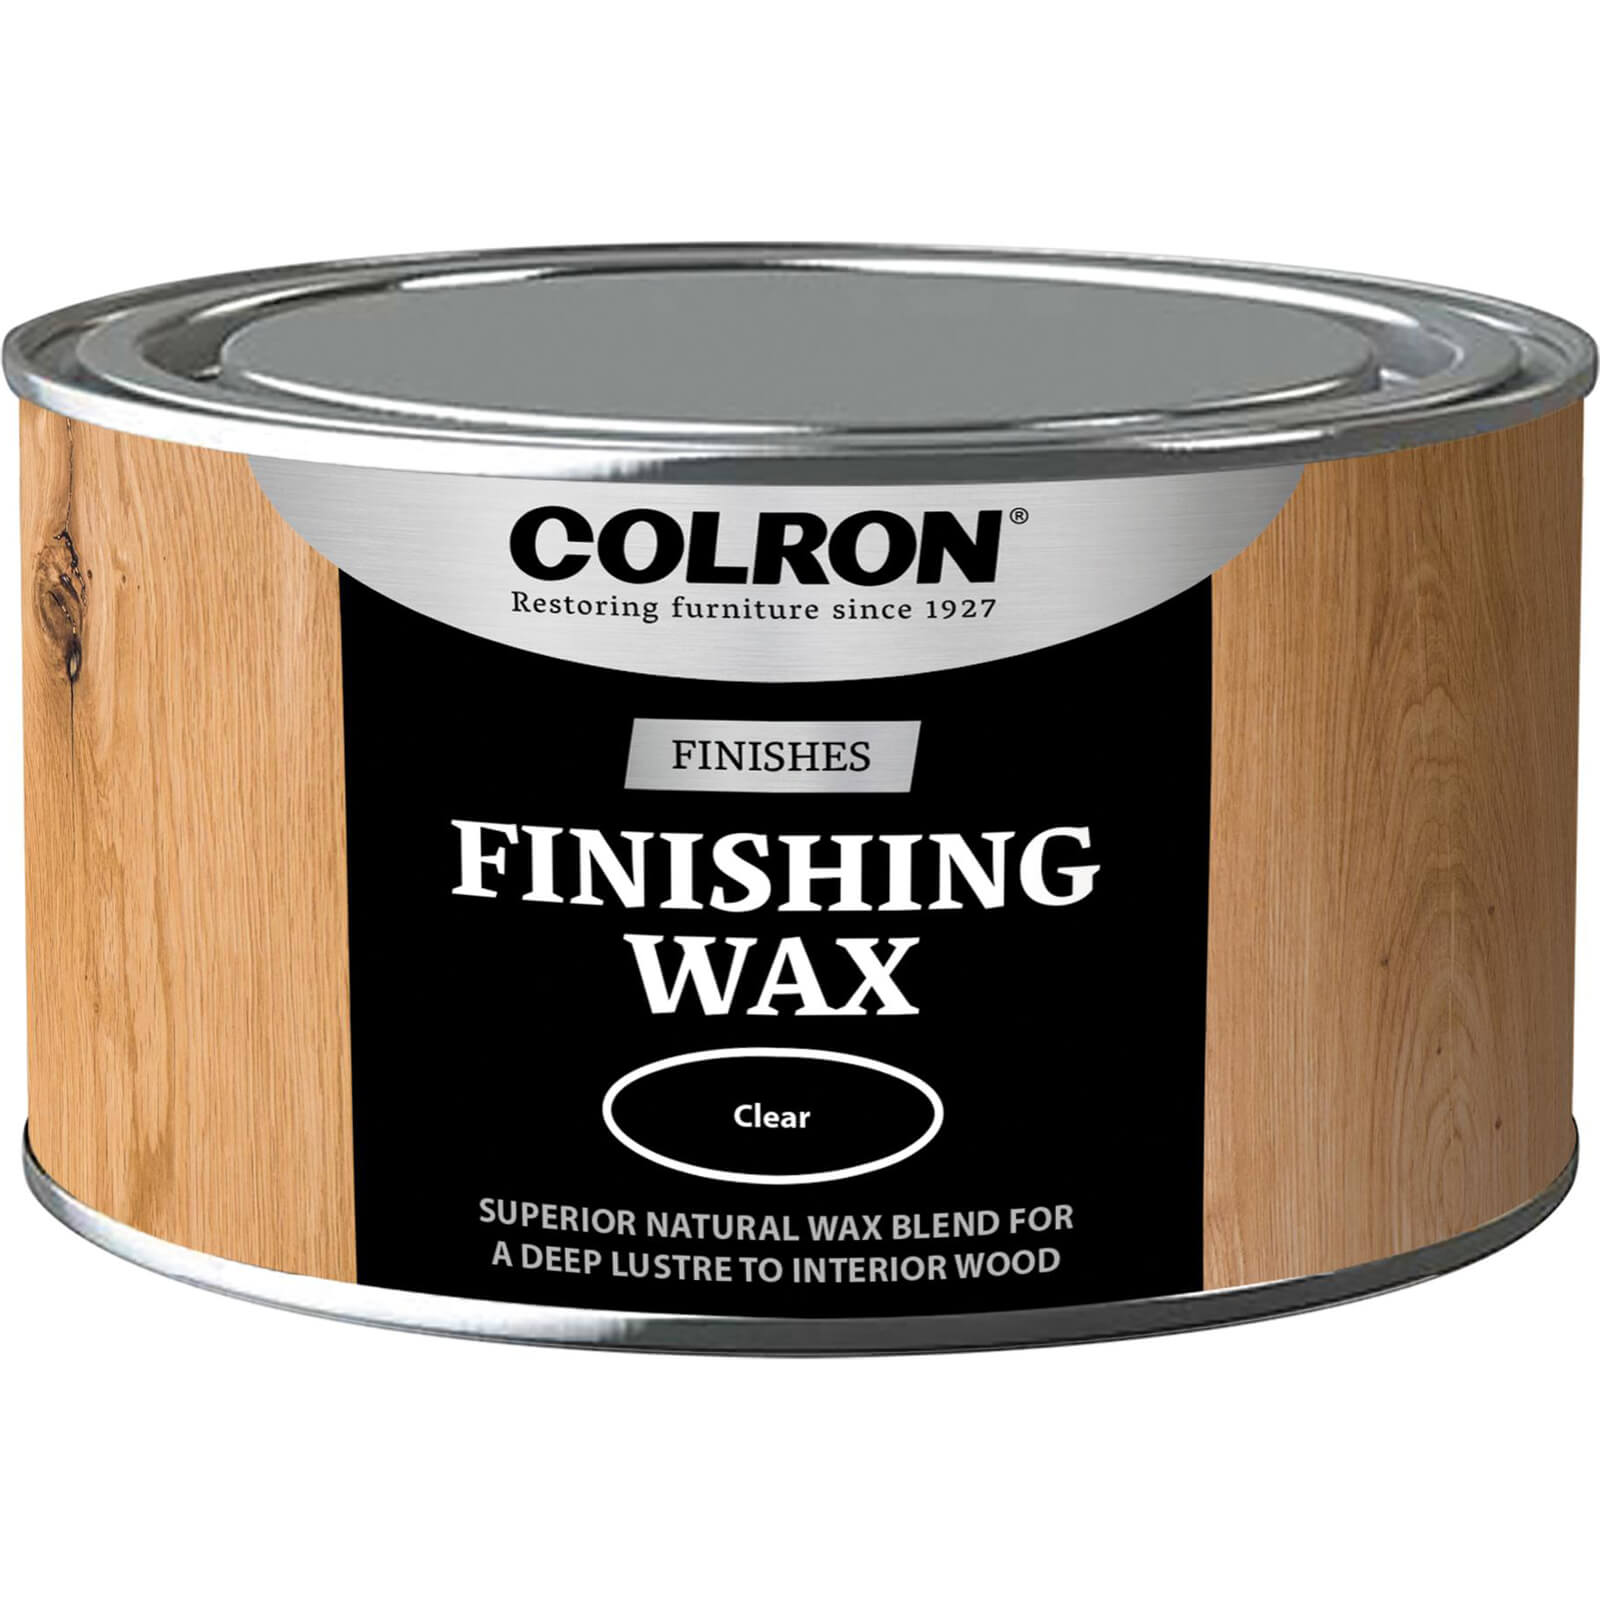 Image of Ronseal Colron Refined Finishing Wax 325g